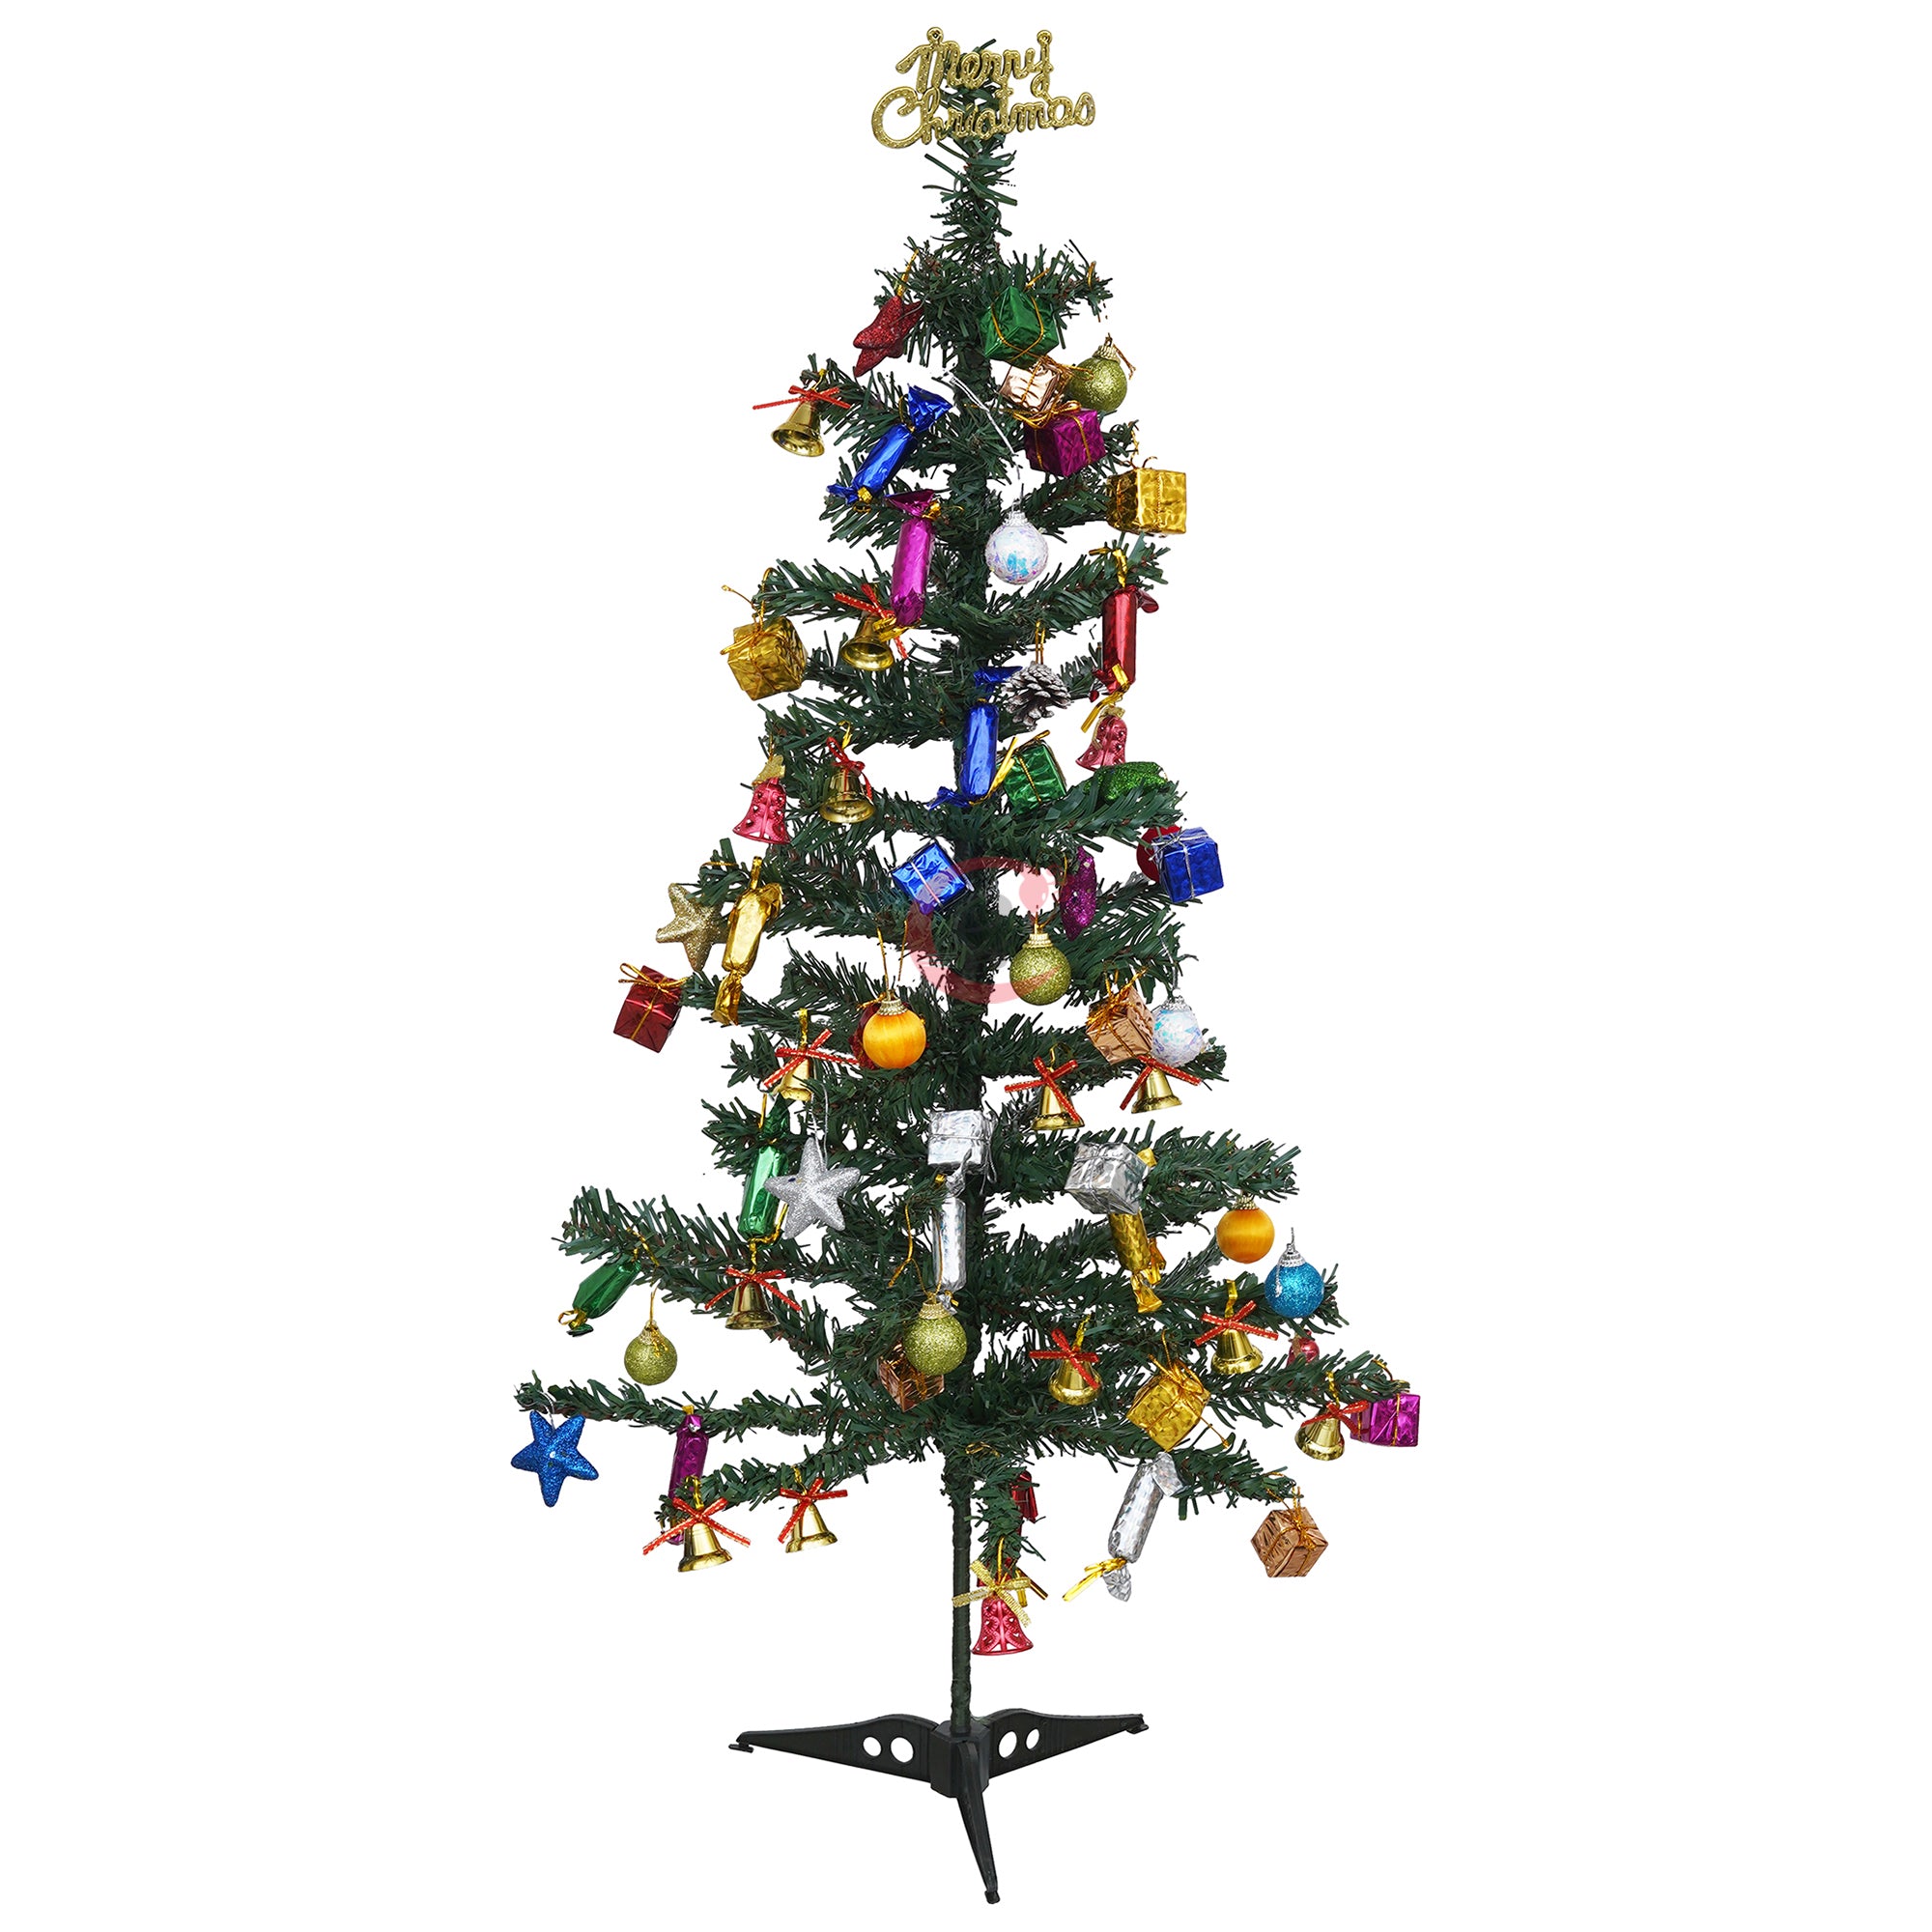 eCraftIndia 4 Feet Green Artificial Christmas Tree Xmas Pine Tree with Metal Stand - Xmas Tree for Indoor, Outdoor, Home, Living Room, Office, Church Decor - Merry Christmas Decoration Item… 8